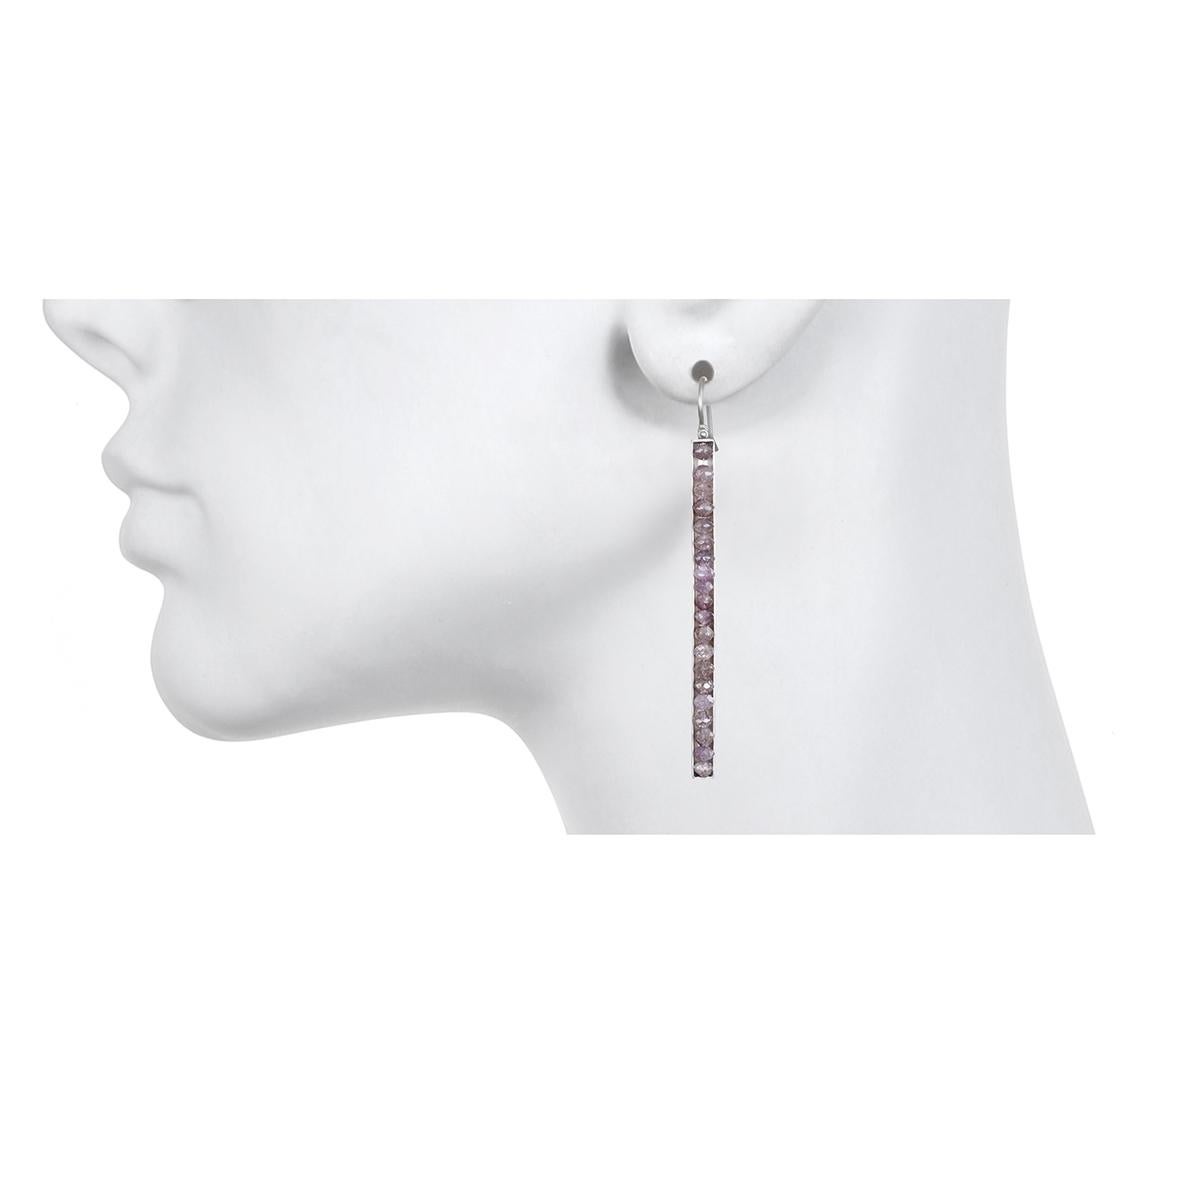 Feminine yet edgy, the matchstick style platinum earrings feature lavender faceted diamonds that are channel set for a clean, sleek look.  The hinge detail provides movement and sparkle. Matte-finished.
Diamonds: natural lavender color 7.41 Carats